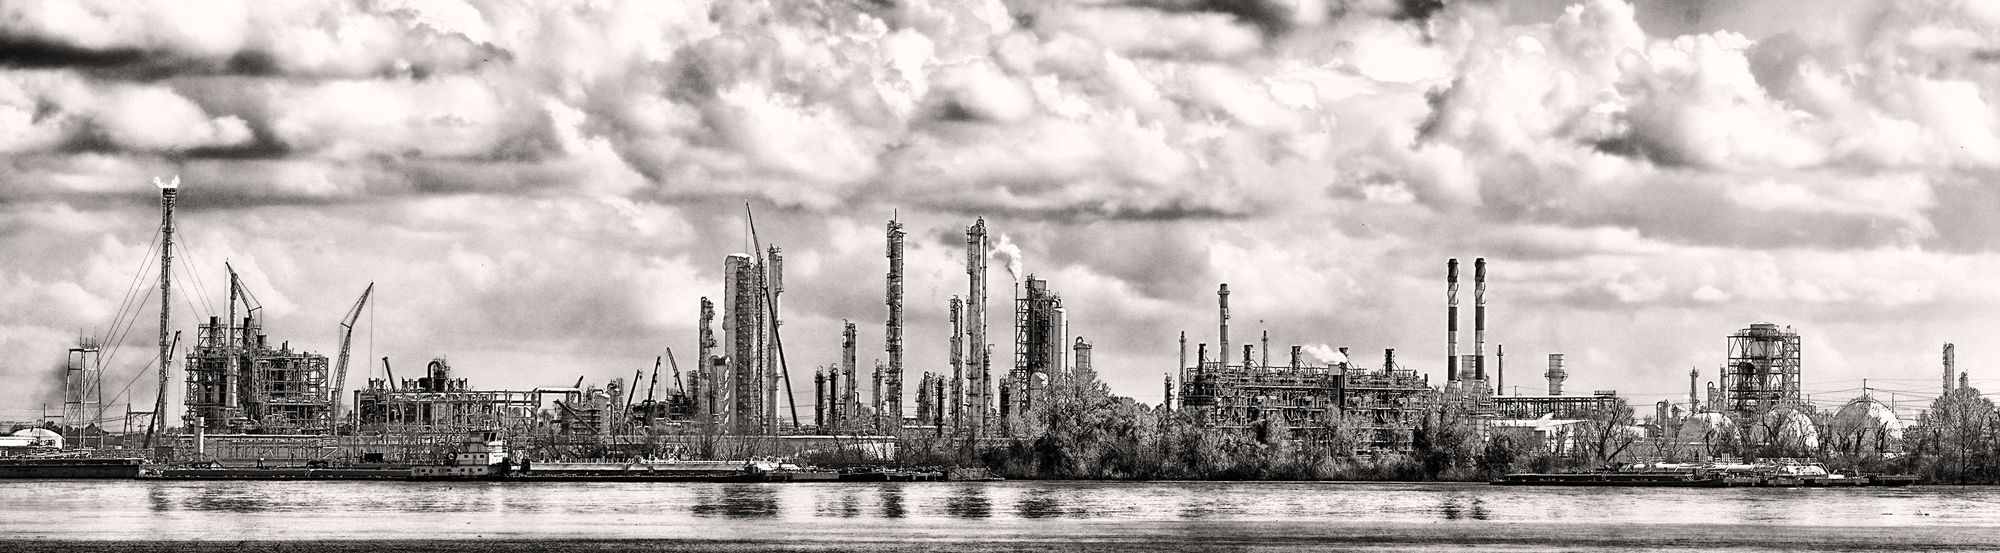 Six image stitch, Oil Refinery, New Orleans